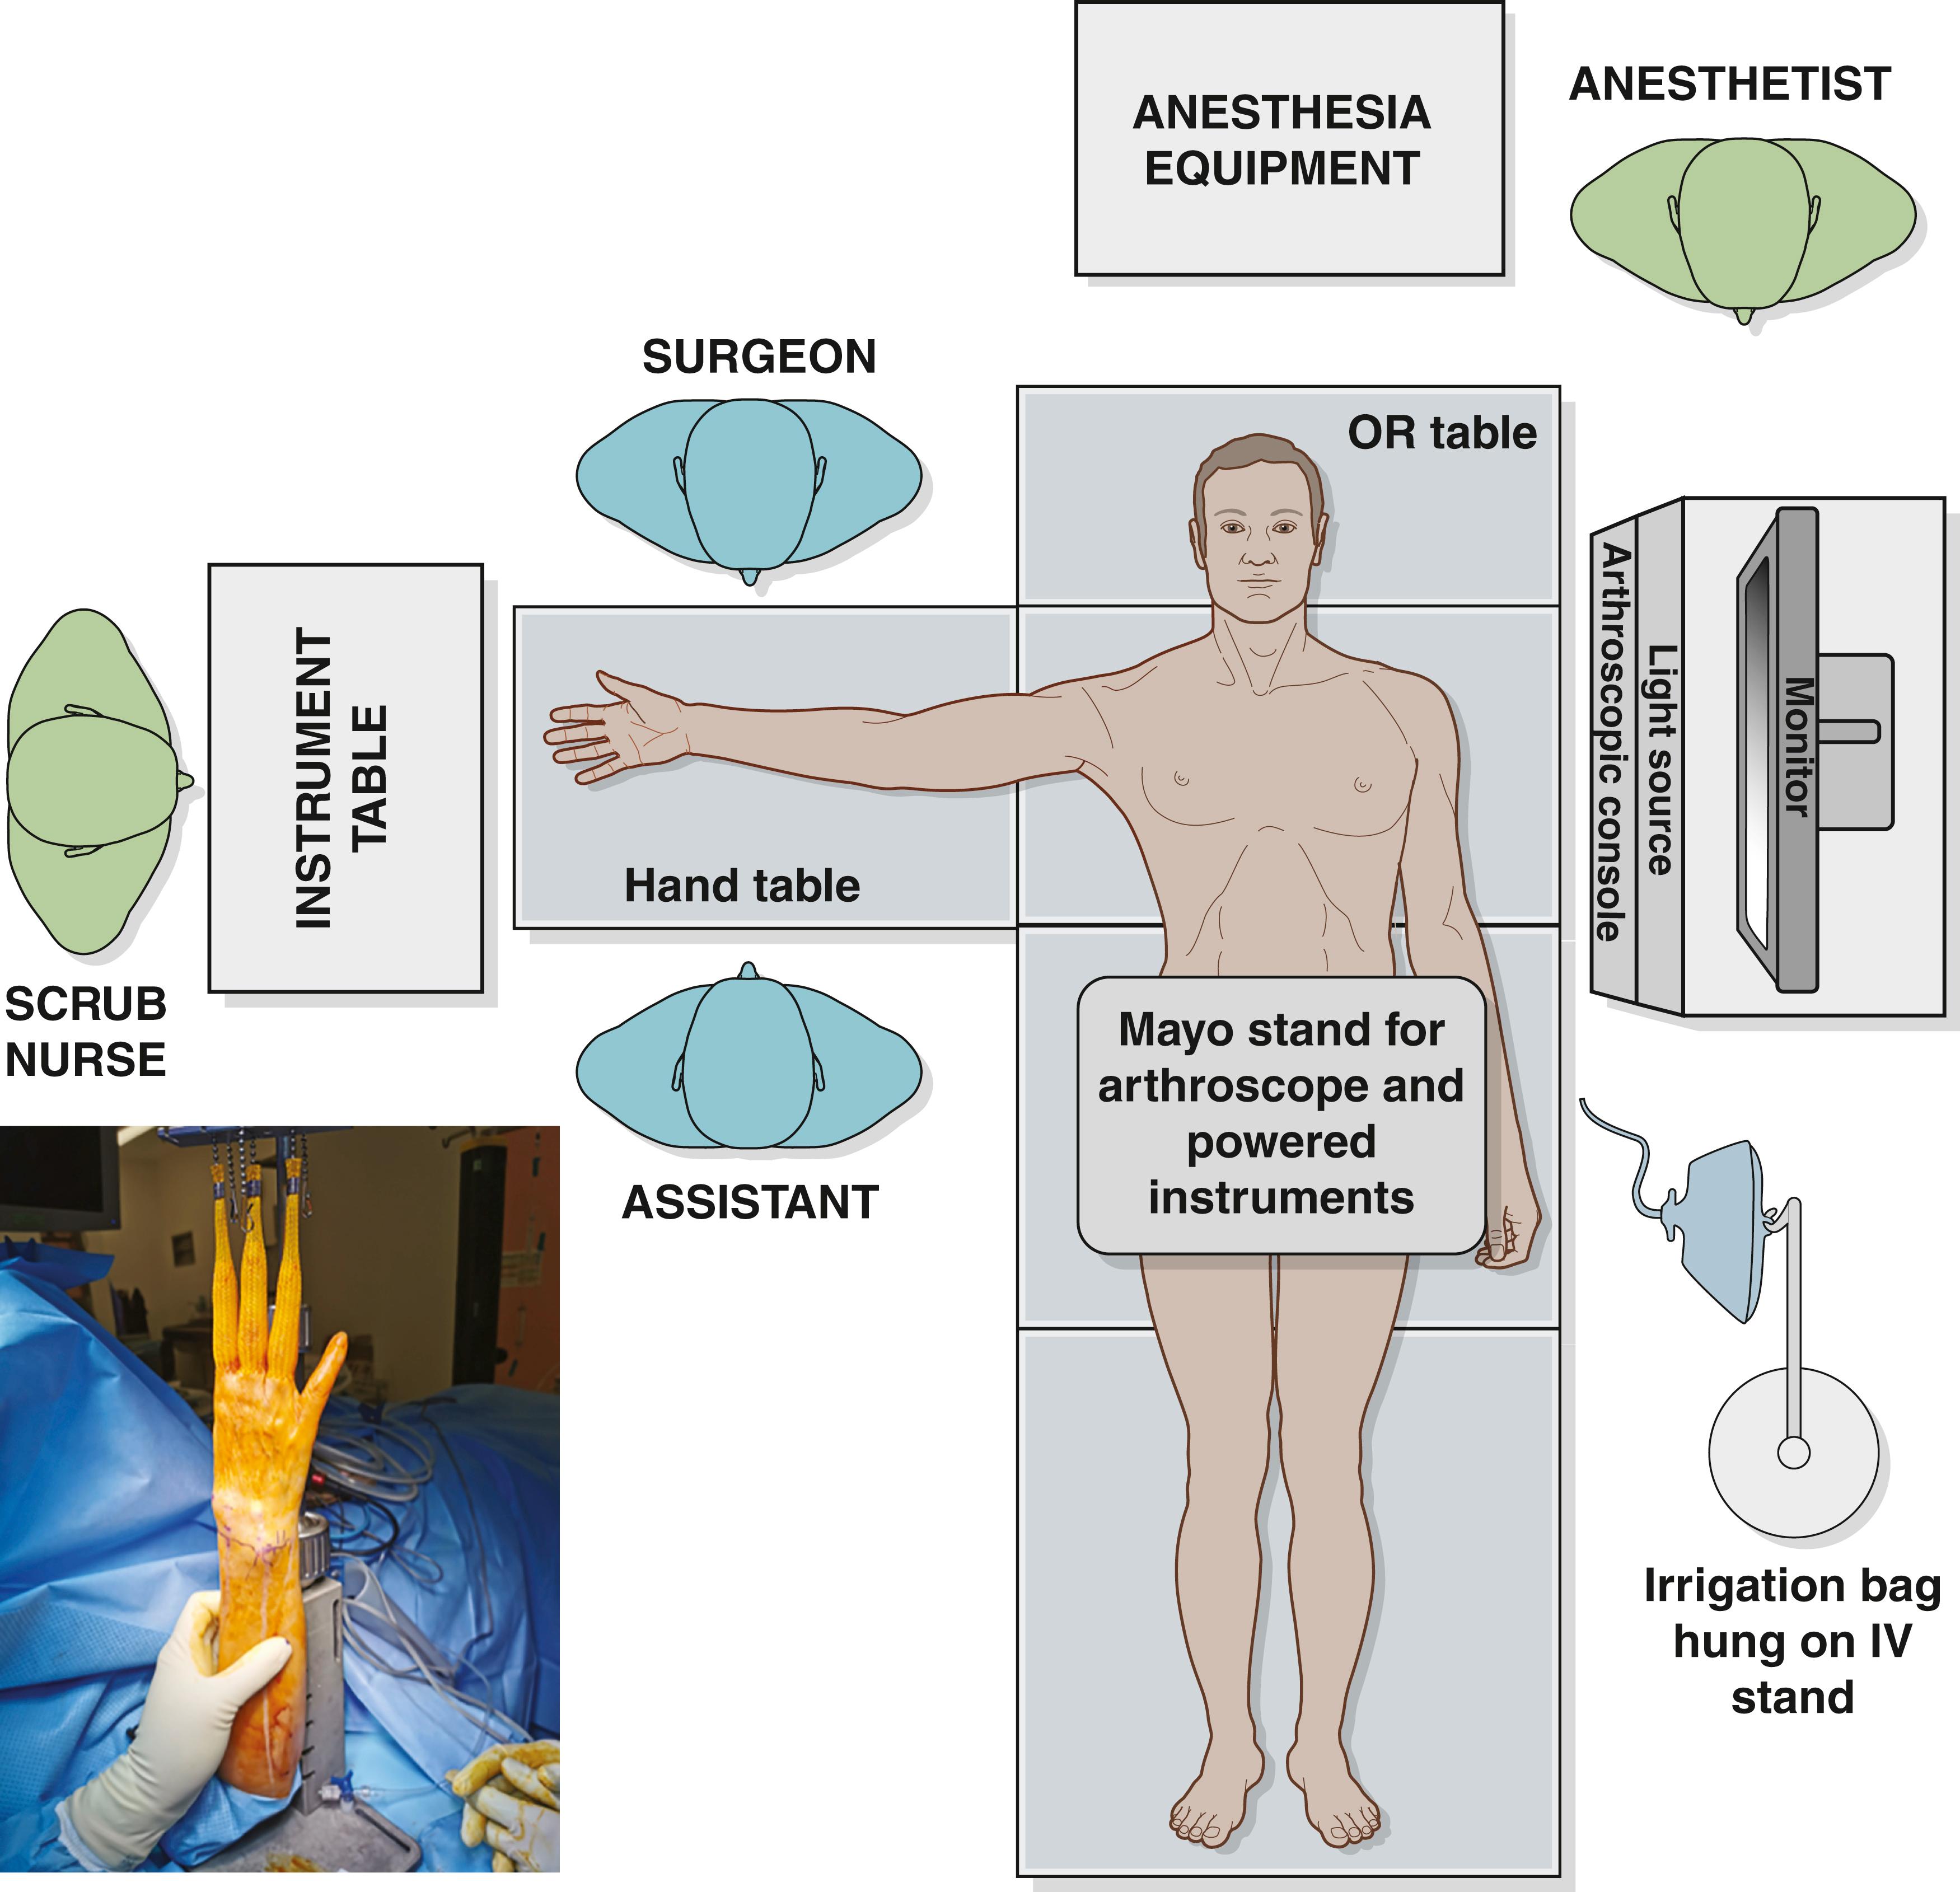 Fig. 17.1, Standard wrist arthroscopy setup, patient and surgeon position in operating room.